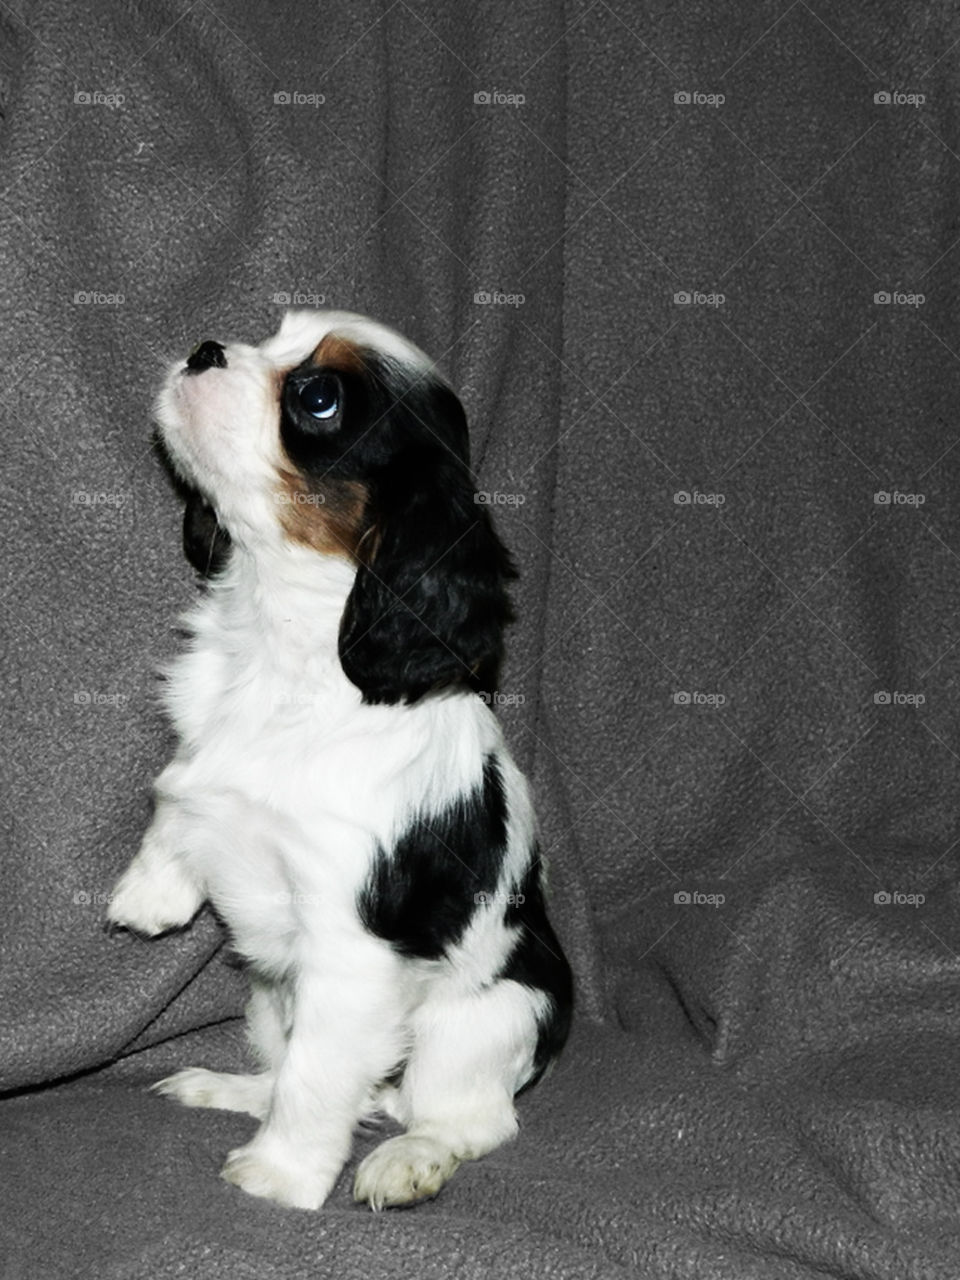 Dog Cavalier king charles Ixes in France